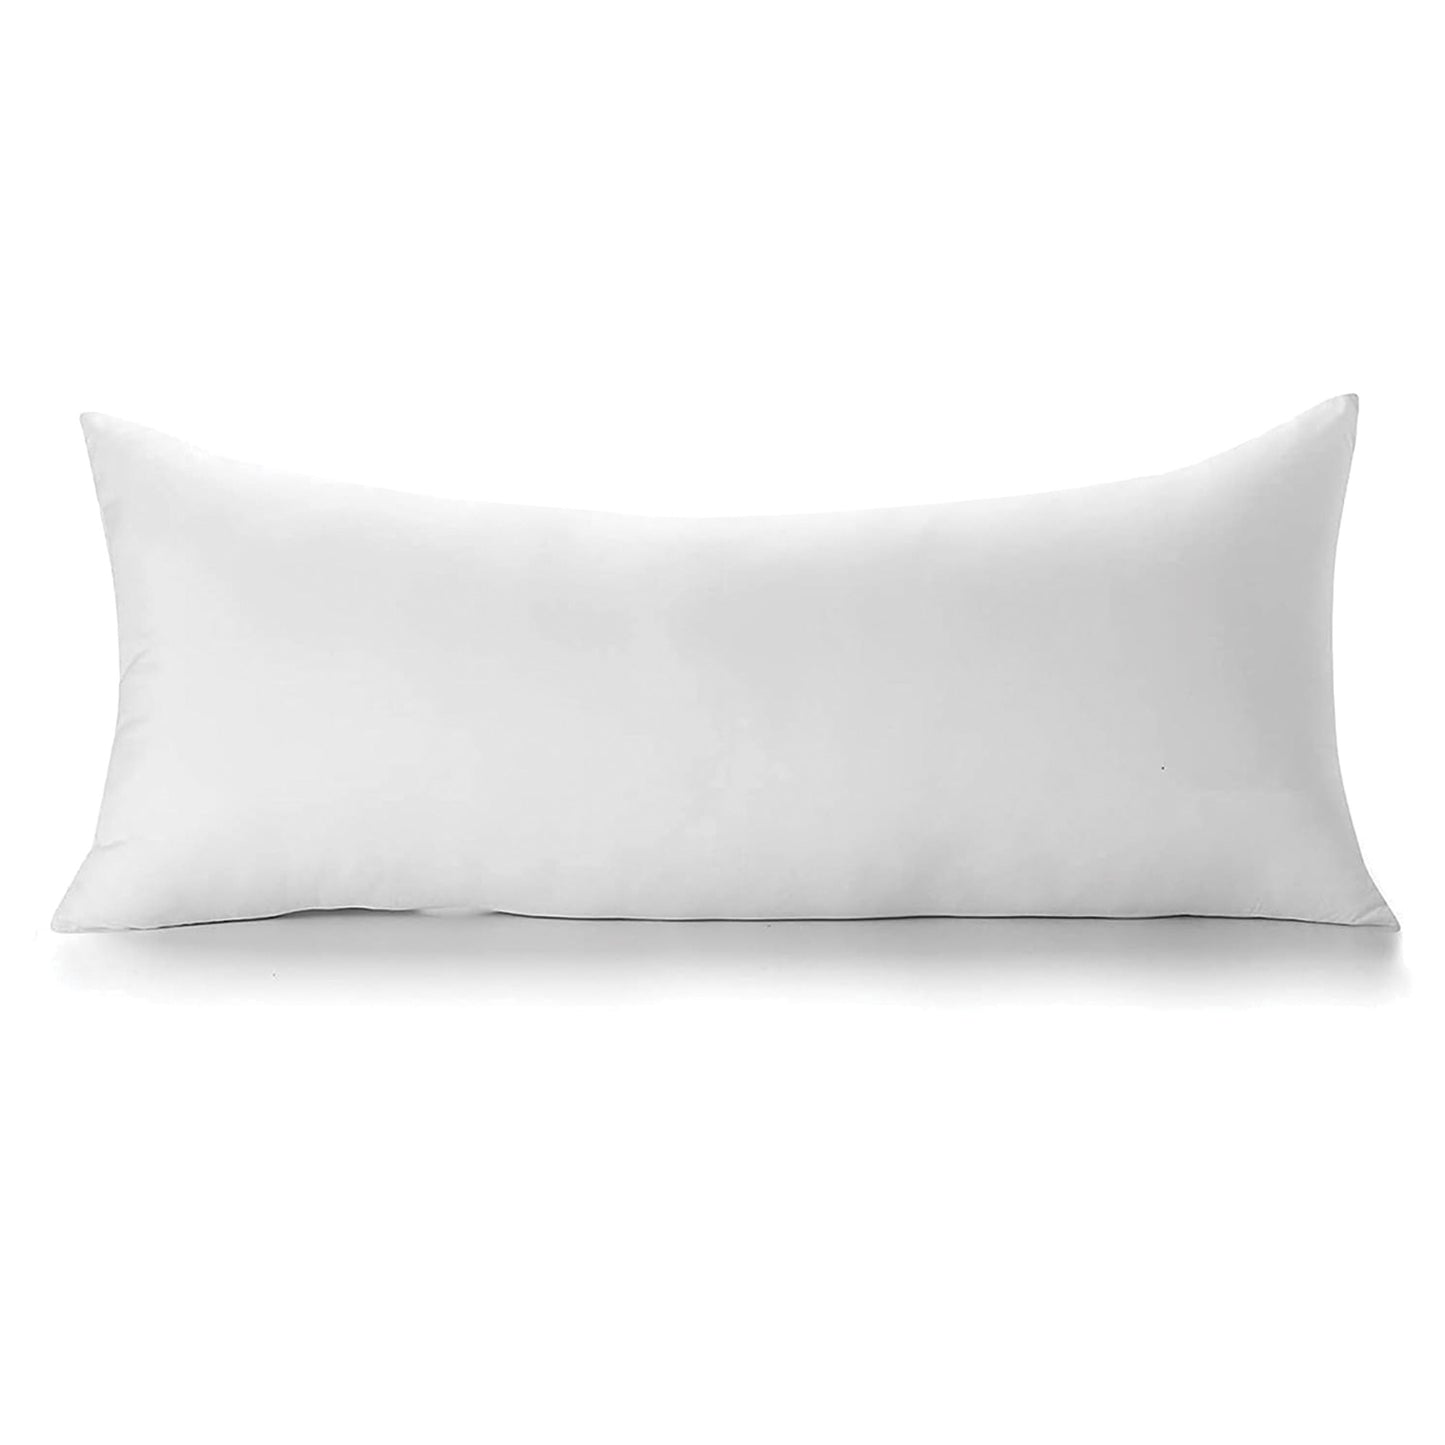 A pristine white body pillow, generously filled with 100% duck down boasting a lofty 550 fill power, promising luxurious softness and support for a dreamy night's sleep.